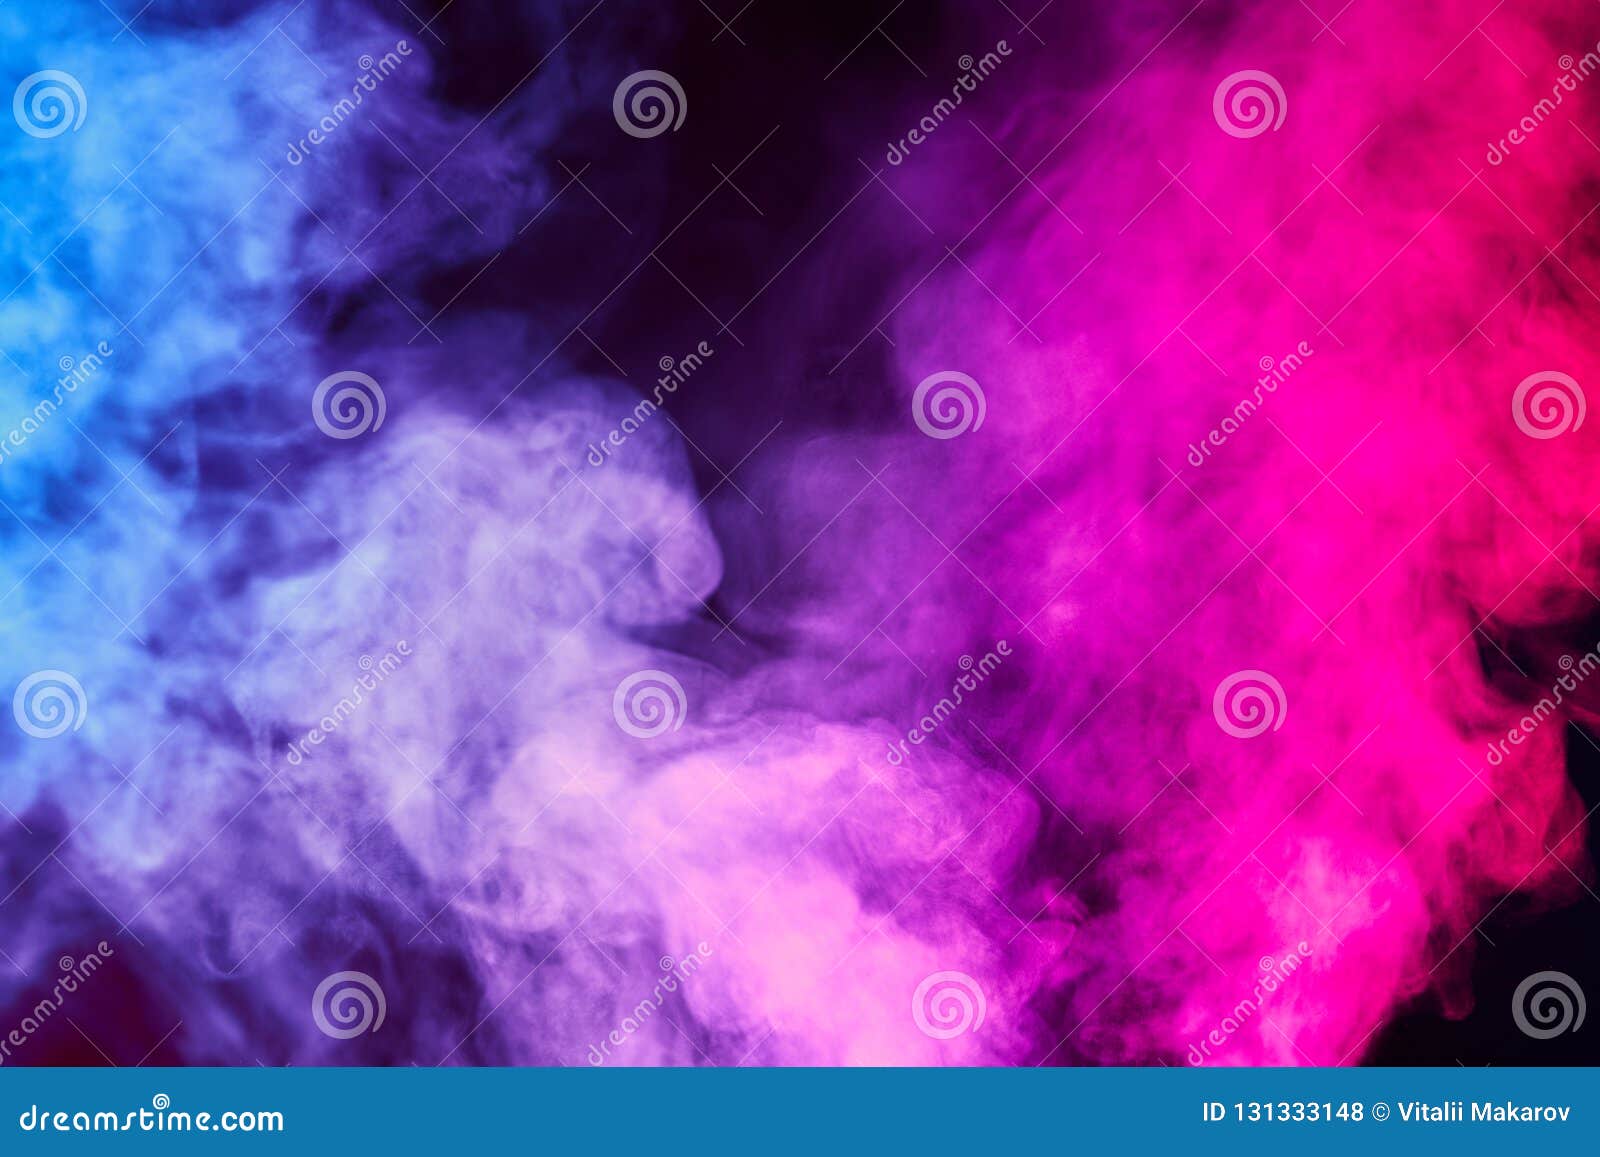 water vapor with the effects of the laser beam and a multicolored light